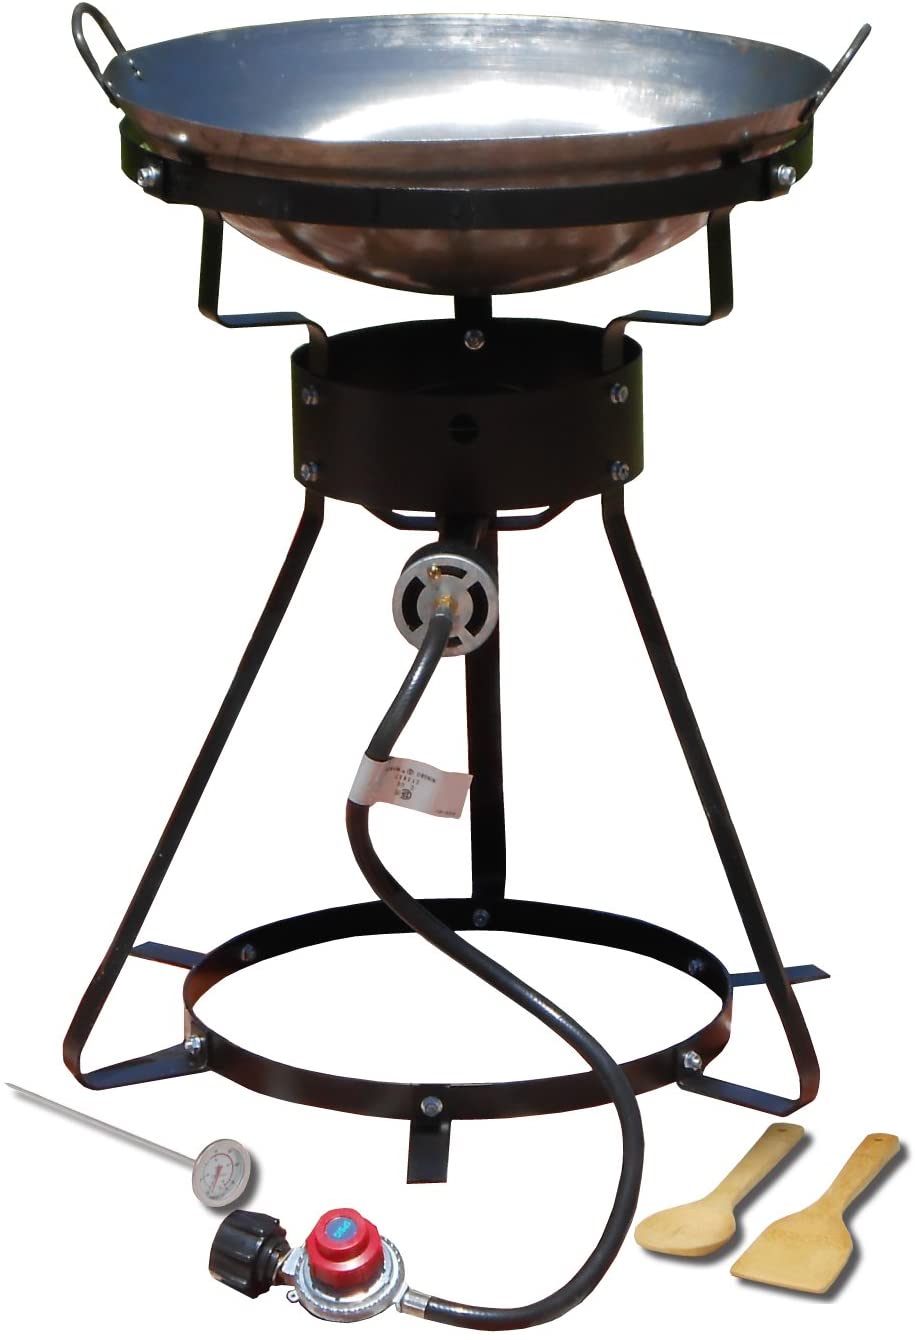 King Kooker 24WC 12 Portable Propane Outdoor Cooker with Wok